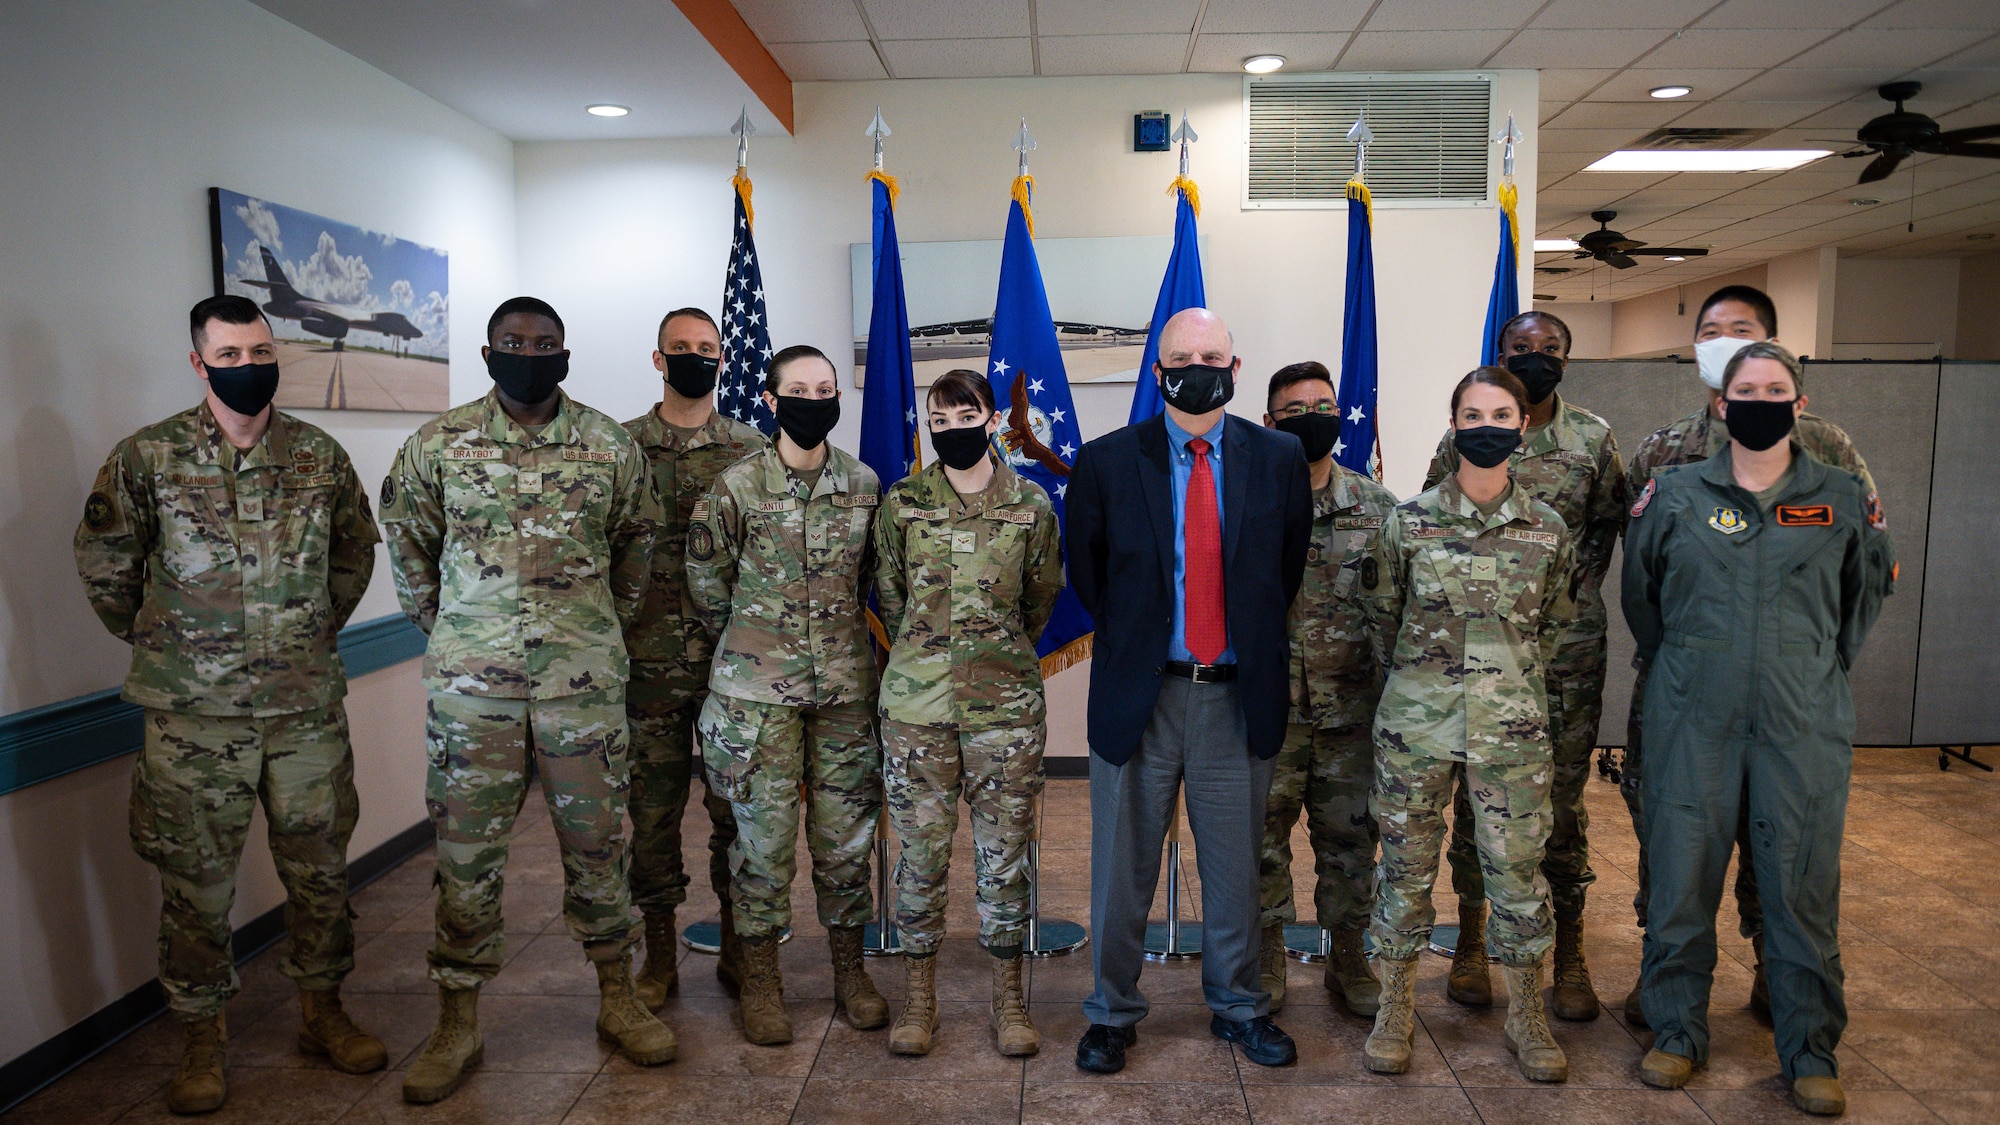 Honorable John P. Roth, acting Secretary of the Air Force, poses for a photo with Barksdale Airmen during a tour at Barksdale Air Force Base, Louisiana, April 6, 2021.